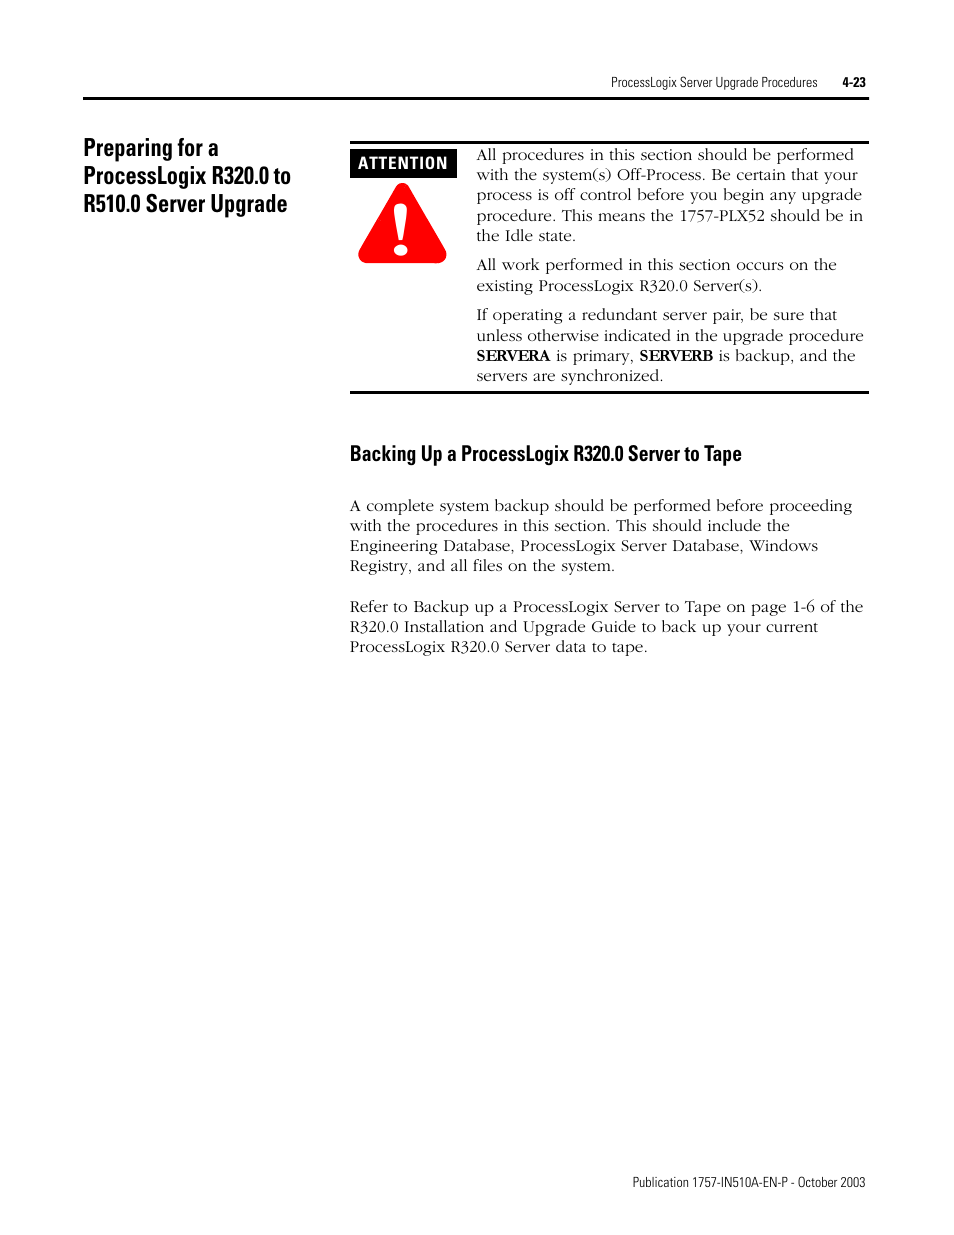 Backing up a processlogix r320.0 server to tape, Preparing for a processlogix r320.0 to r510.0, Server upgrade -23 | Rockwell Automation 1757-SWKIT5100 ProcessLogix R510.0 Installation and Upgrade Guide User Manual | Page 107 / 271